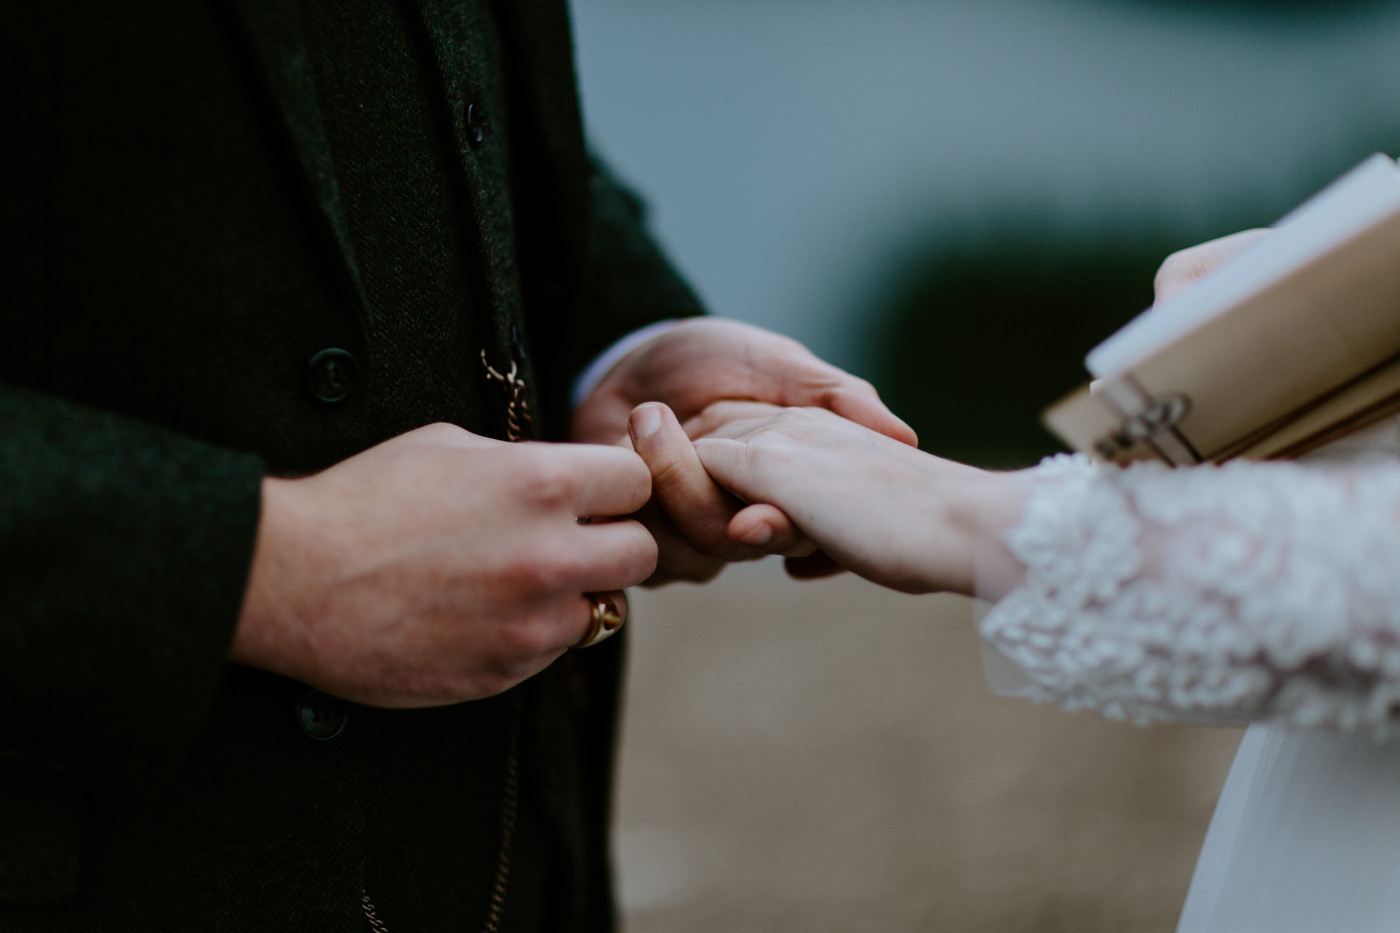 Alex holds Elizabeth's hand to exchange rings. Elopement photography at North Cascades National Park by Sienna Plus Josh.